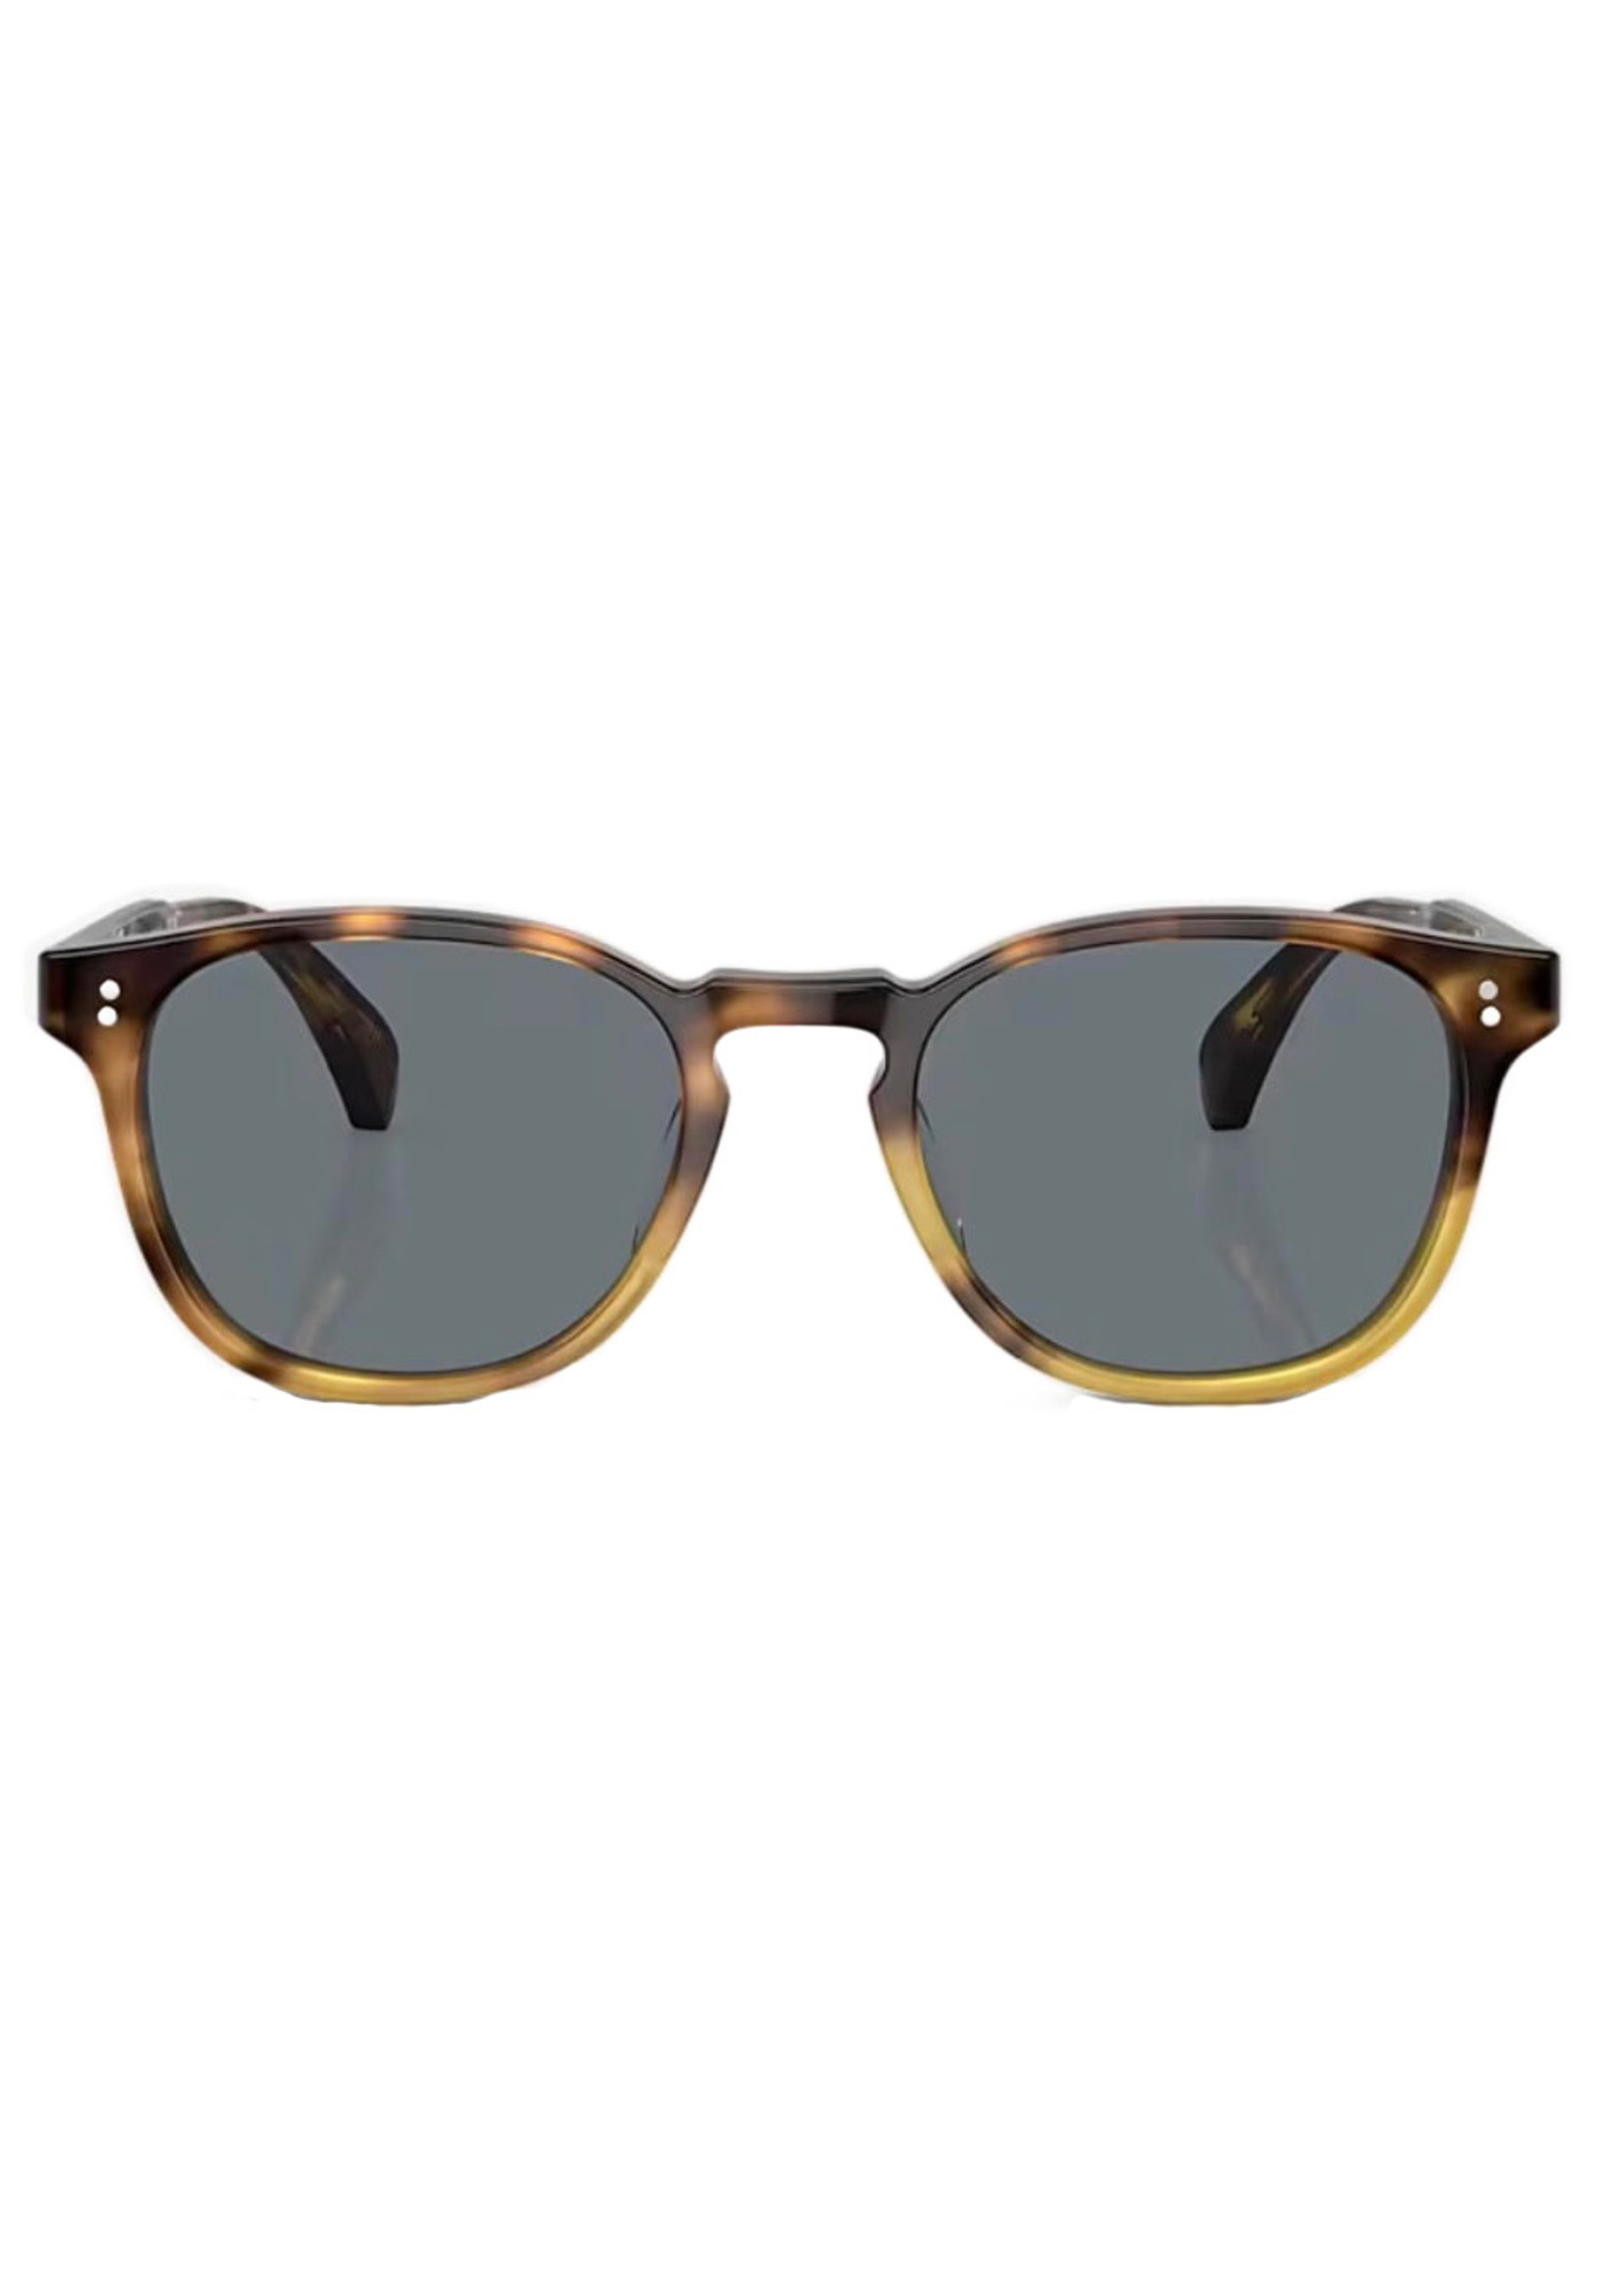 OLIVER PEOPLES FINLEY ESQUIRE SUNGLASS